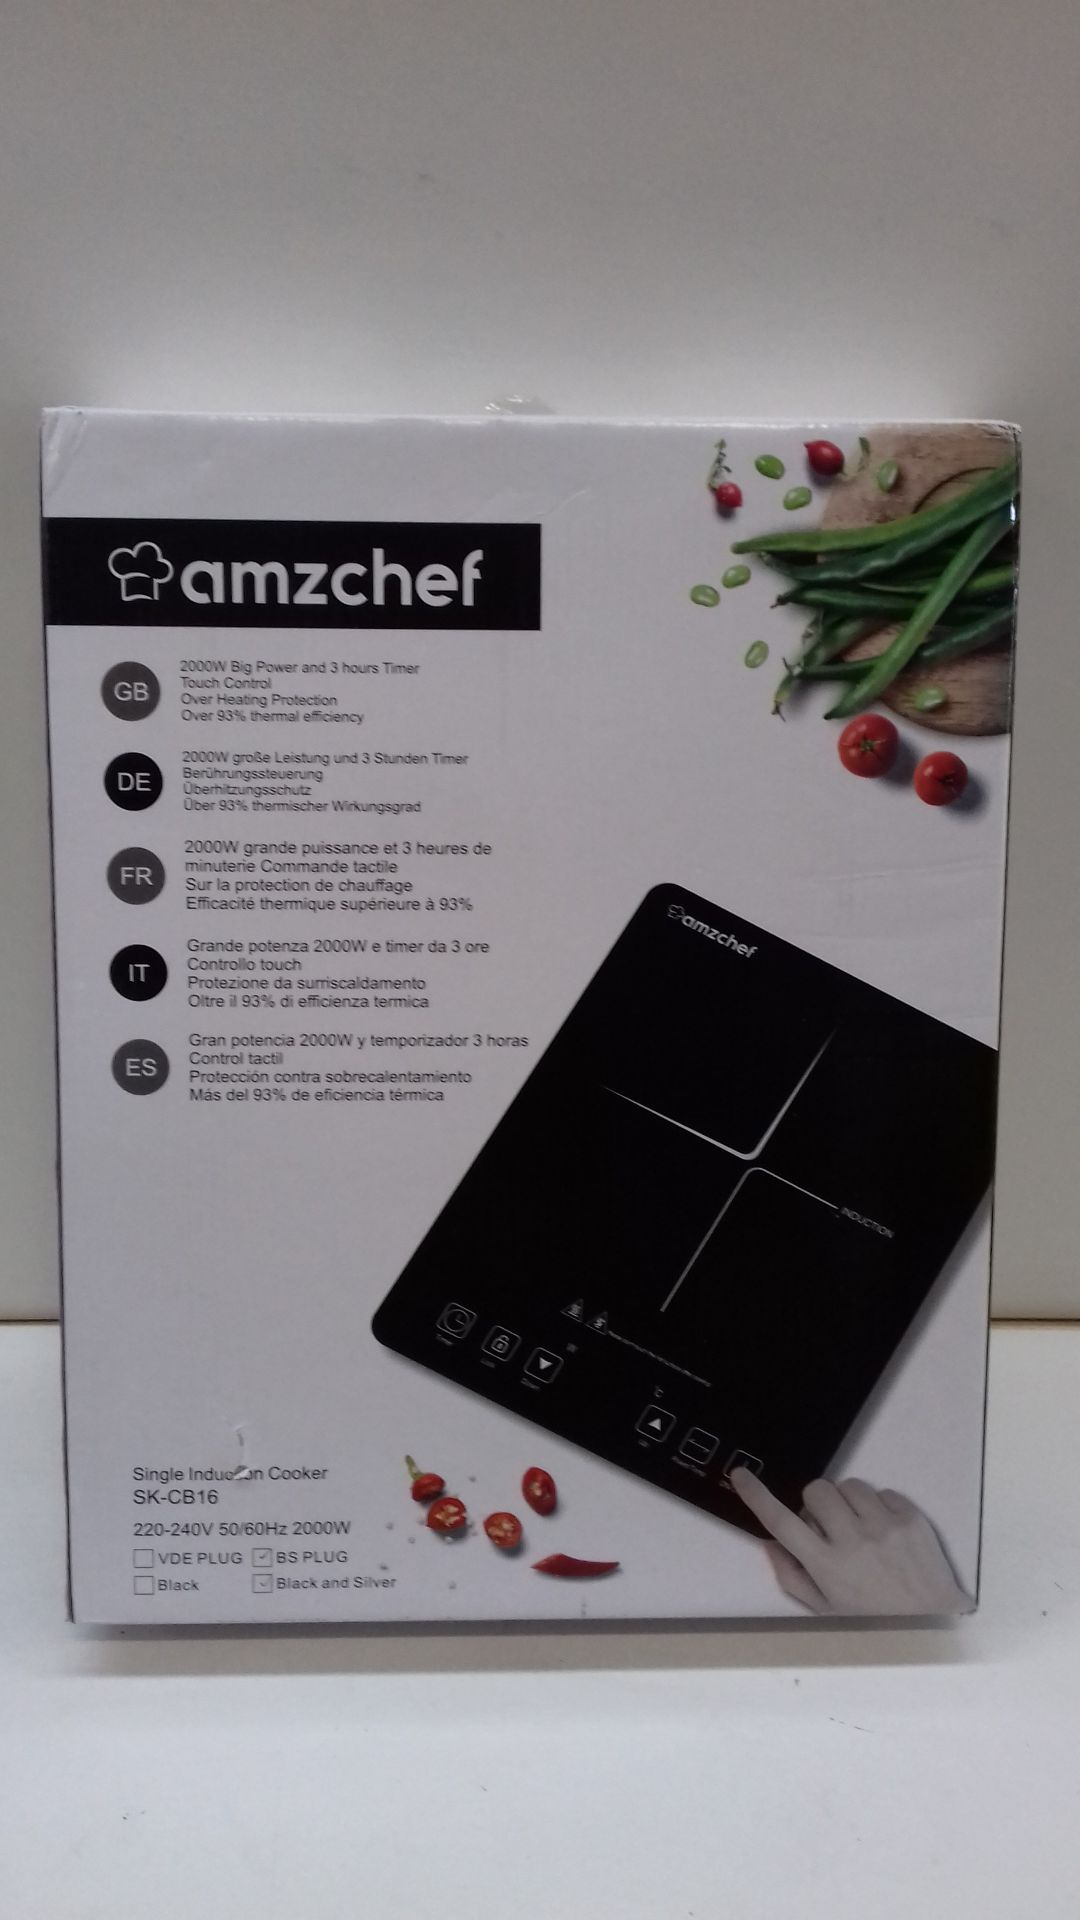 RRP £55.49 AMZCHEF Single Induction Cooker - Image 2 of 2